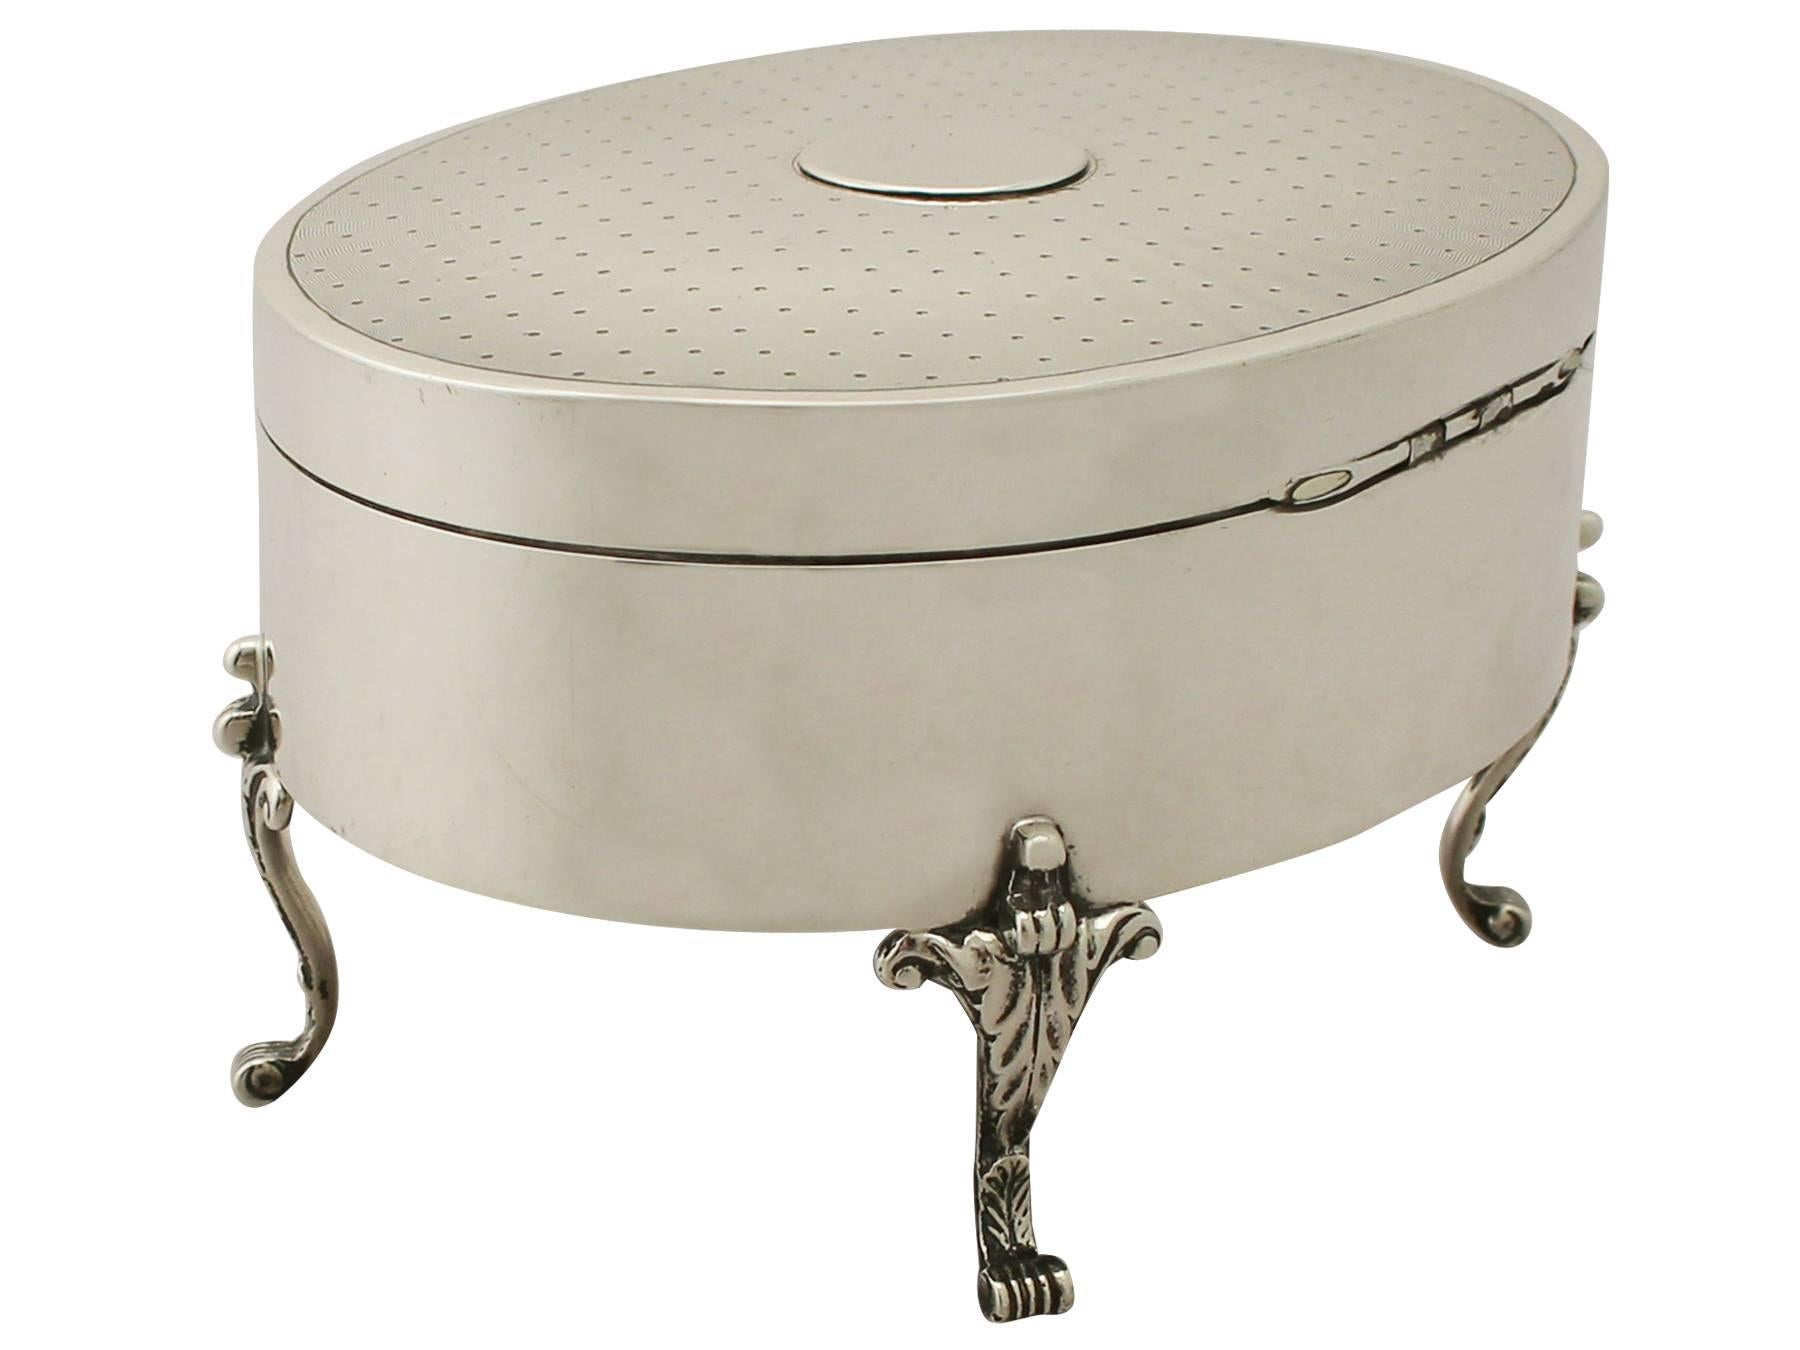 A fine and impressive antique George V English sterling silver jewelry/trinket box; an addition to our ornamental silverware collection.

This exceptional antique George V sterling silver trinket box has a plain oval form.

The body of this